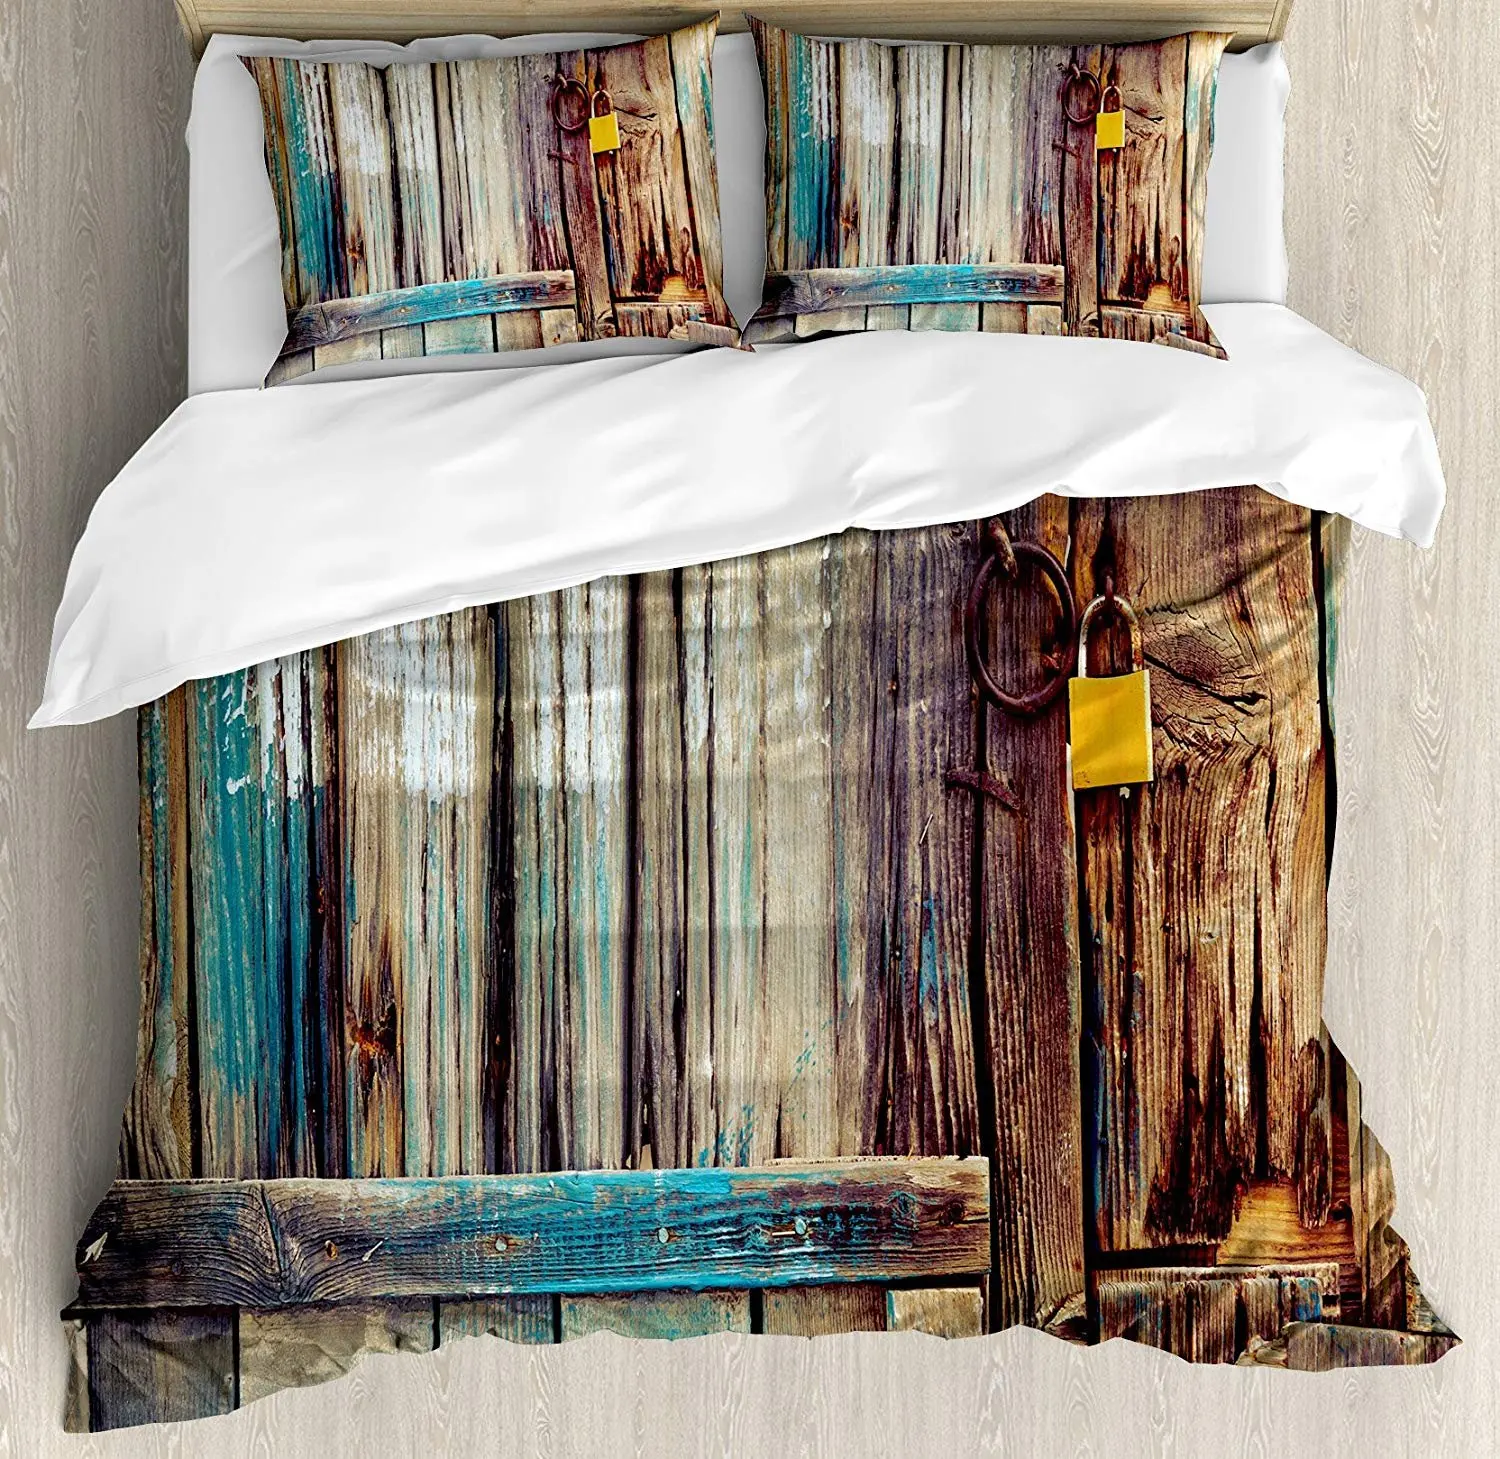 

Rustic Bedding Set Aged Shed Door Backdrop with Color Details Country Living Exterior Pastoral Mansion Duvet Cover Pillowcase